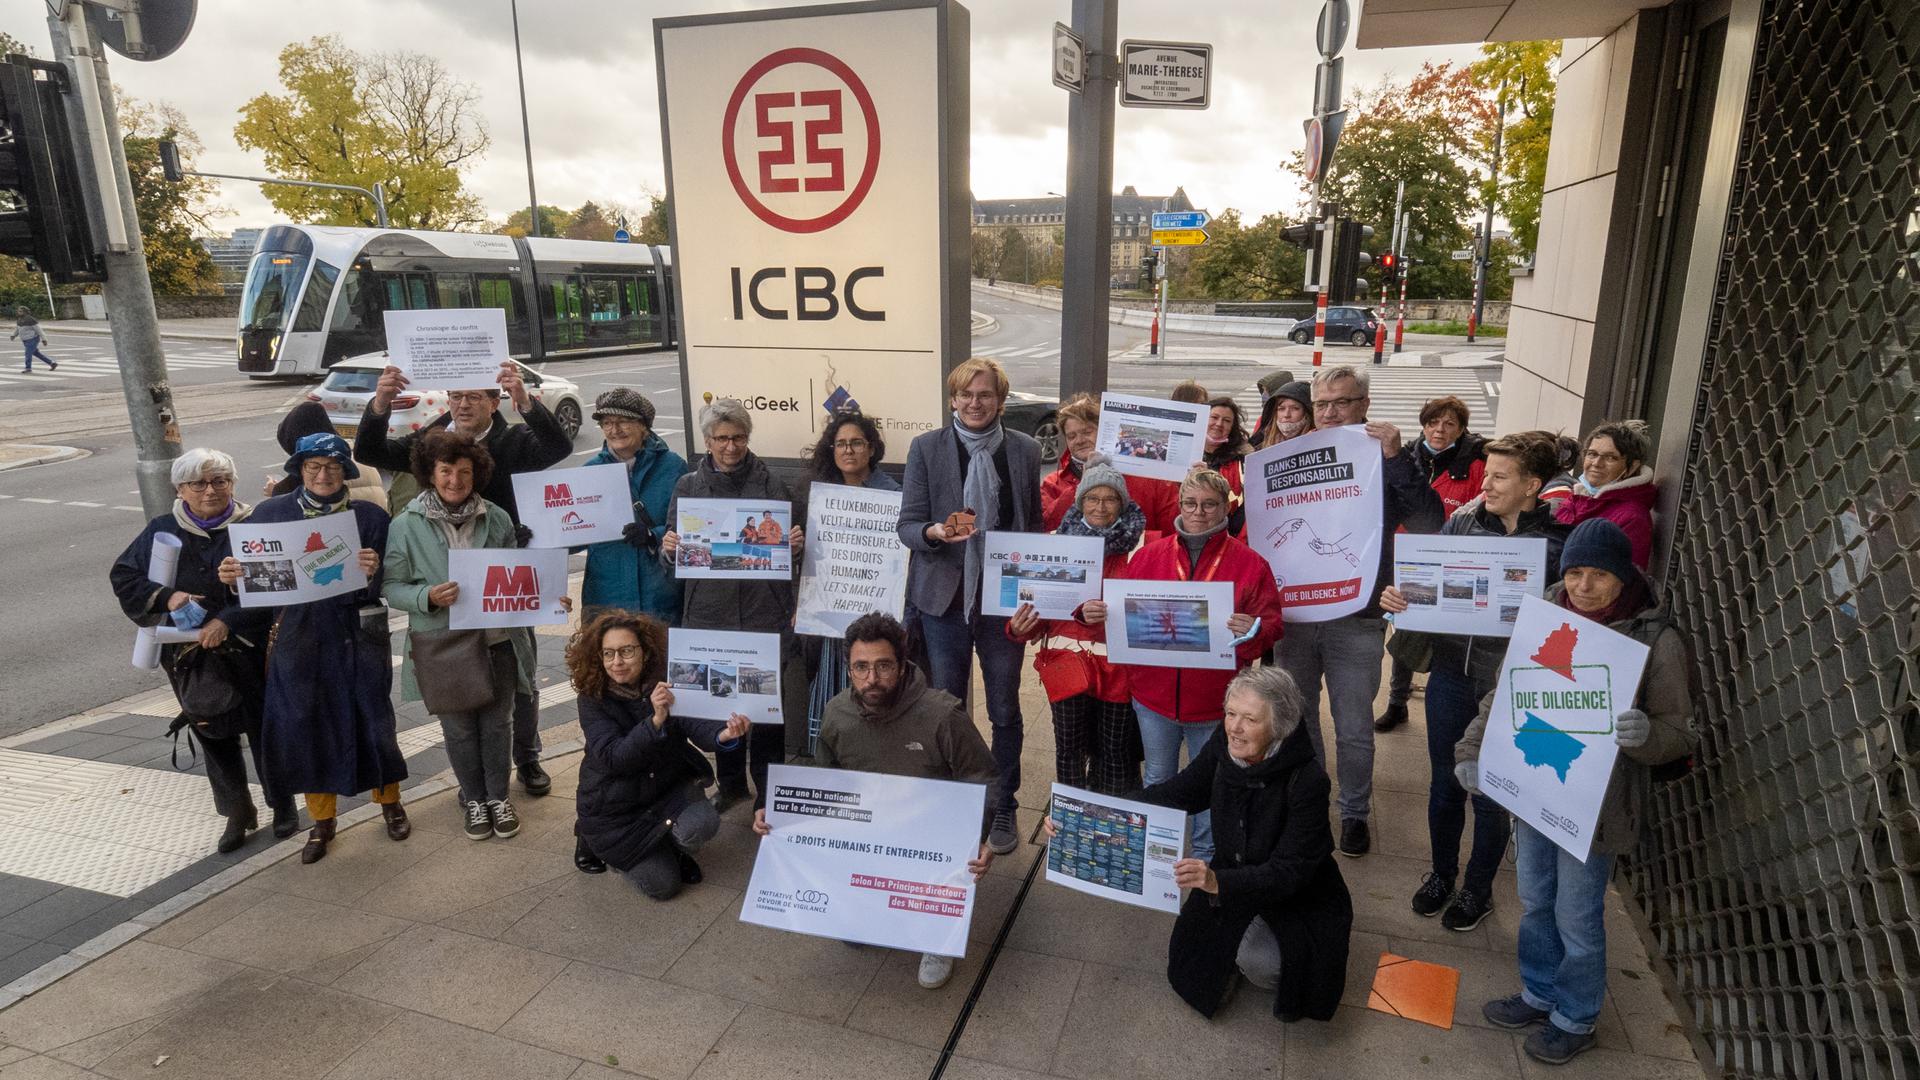 Demonstrators demanding that Luxembourg take action to protect human rights gathered in front of Chinese bank ICBC in the capital city in October 